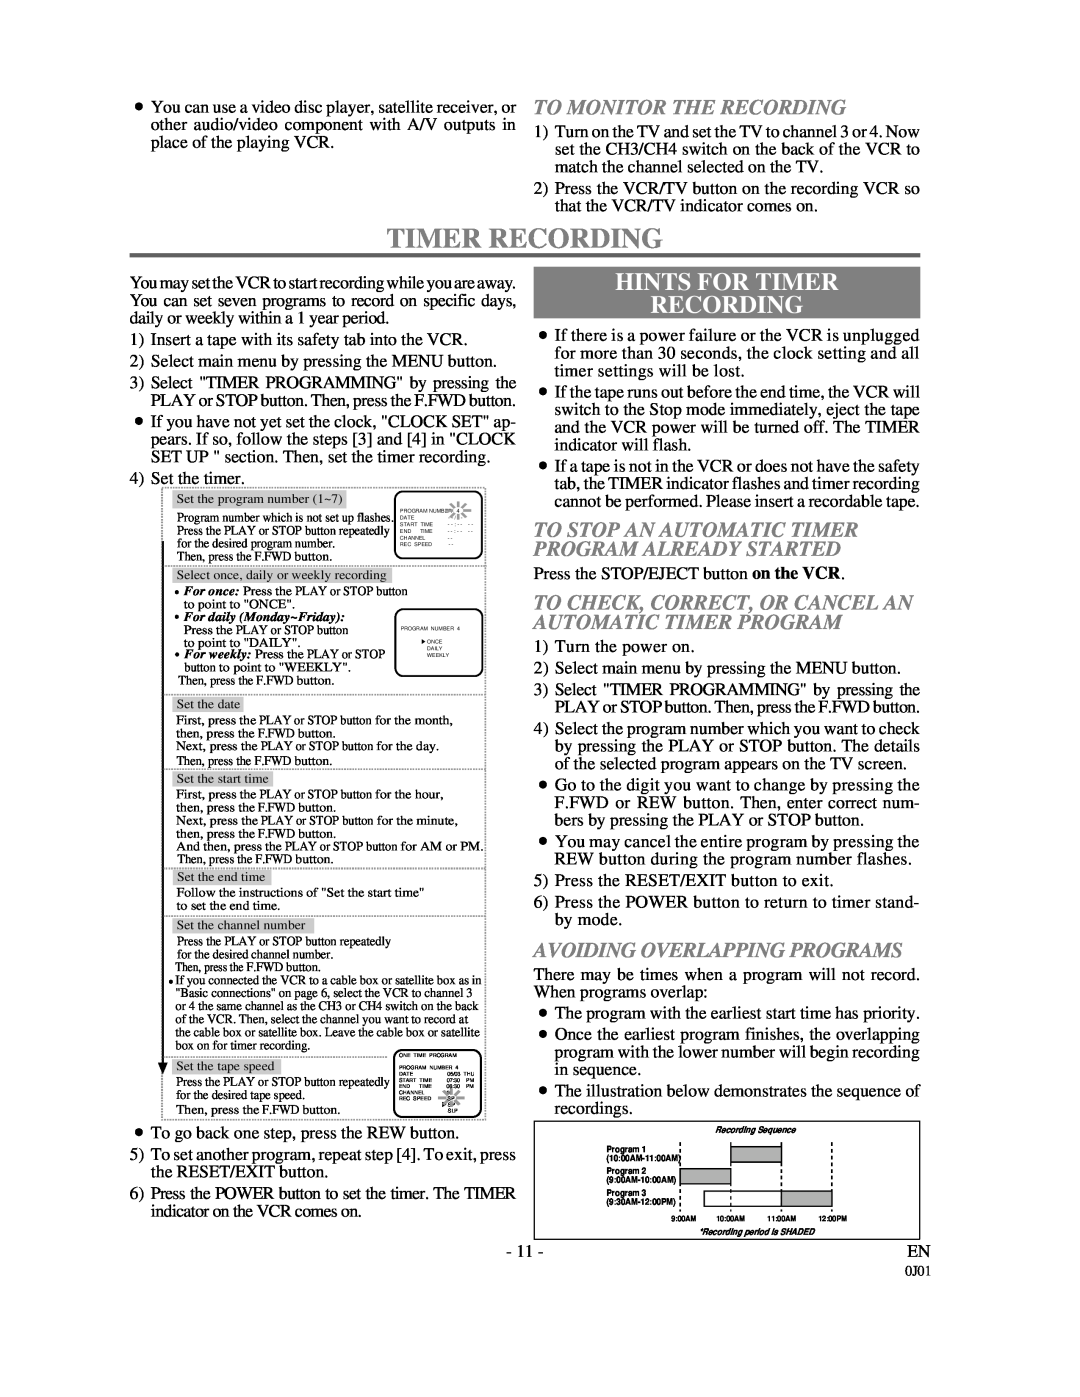 Sylvania SSV6001 owner manual Hints For Timer Recording, To Monitor The Recording, Avoiding Overlapping Programs 